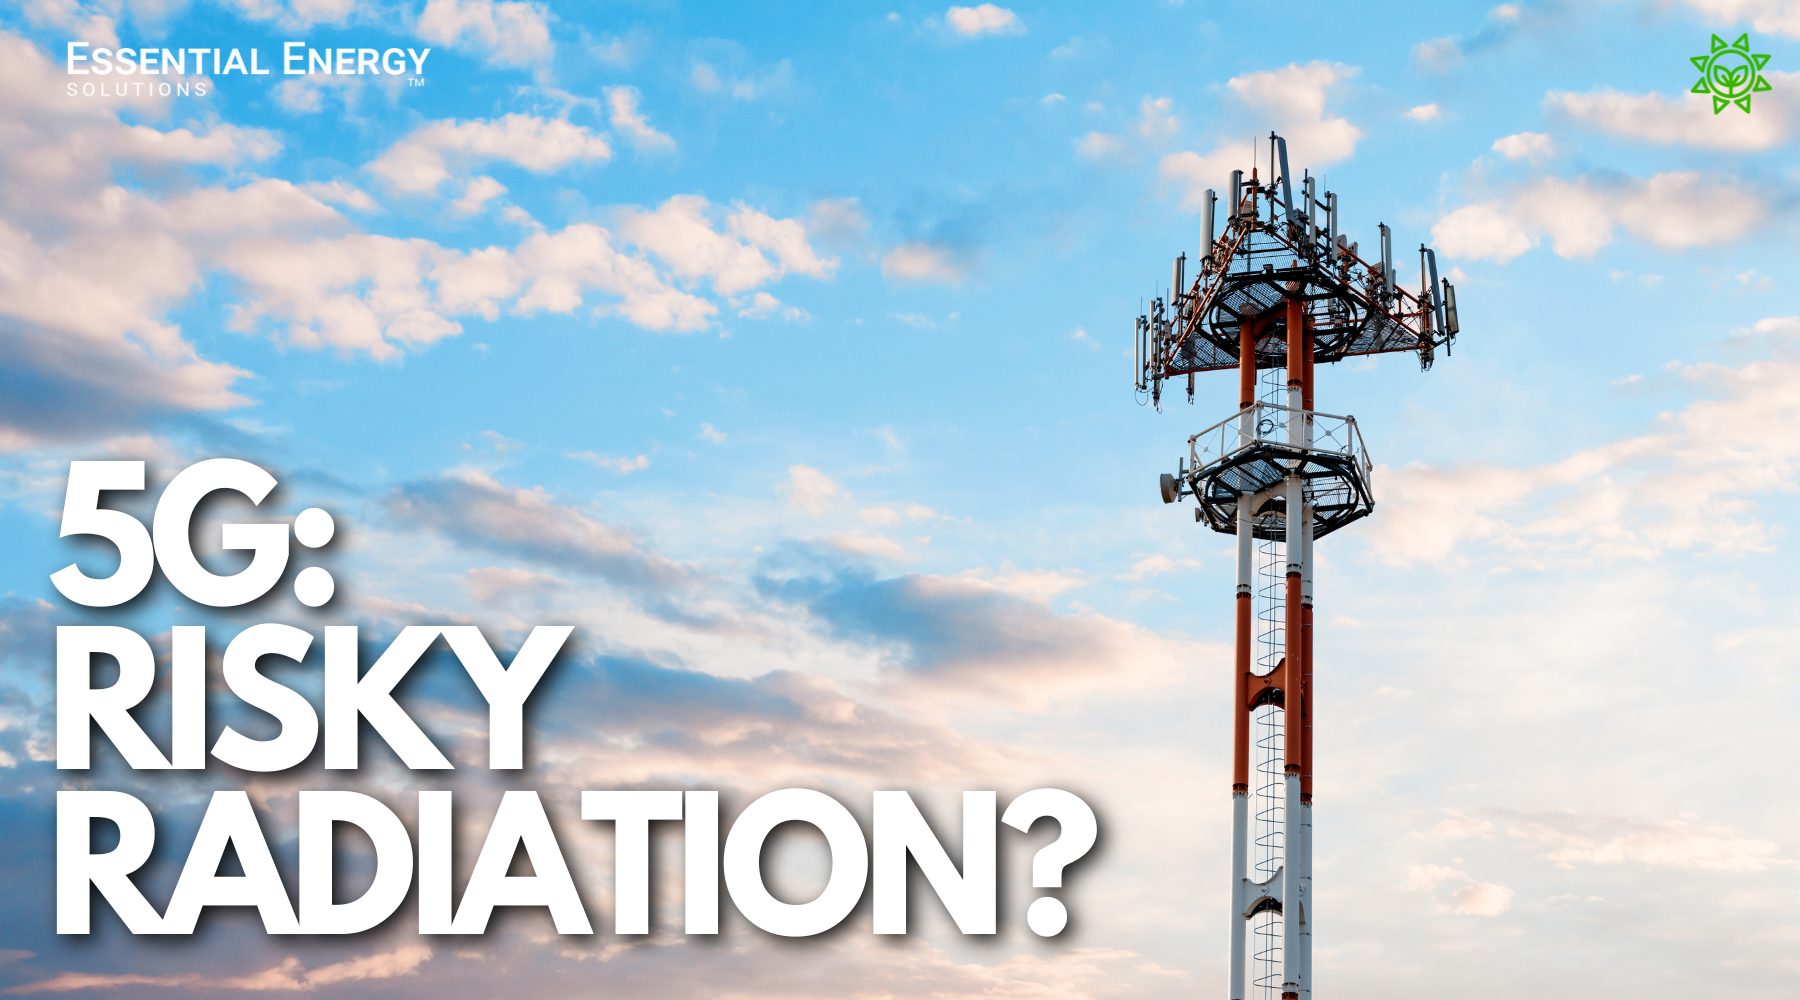 A cell phone tower with many antennas attached to it stands in a field of green grass under a clear blue sky with white clouds. The text "Essential Energy" is written in white letters on a blue rectangle in the lower left corner of the image. The text "SOLUTIONS 5G: RISKY RADIATION?" is written in white letters on a red rectangle in the lower right corner of the image.